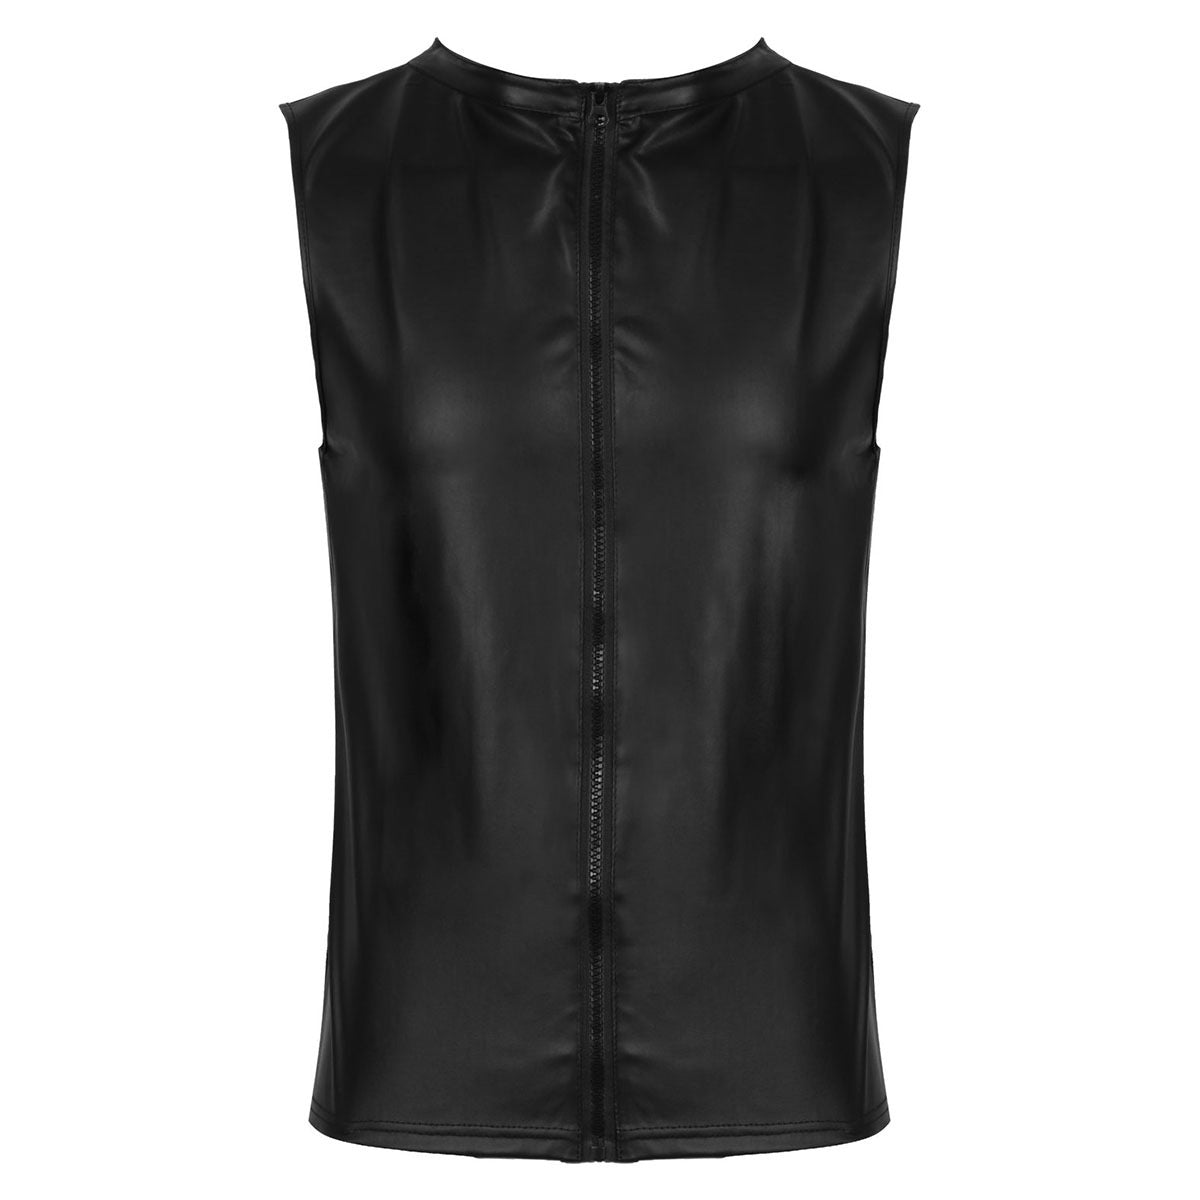 Front Zippered Tank Top For Men / Black Faux Leather Men's Vest / Stage Performance Clubwear - HARD'N'HEAVY